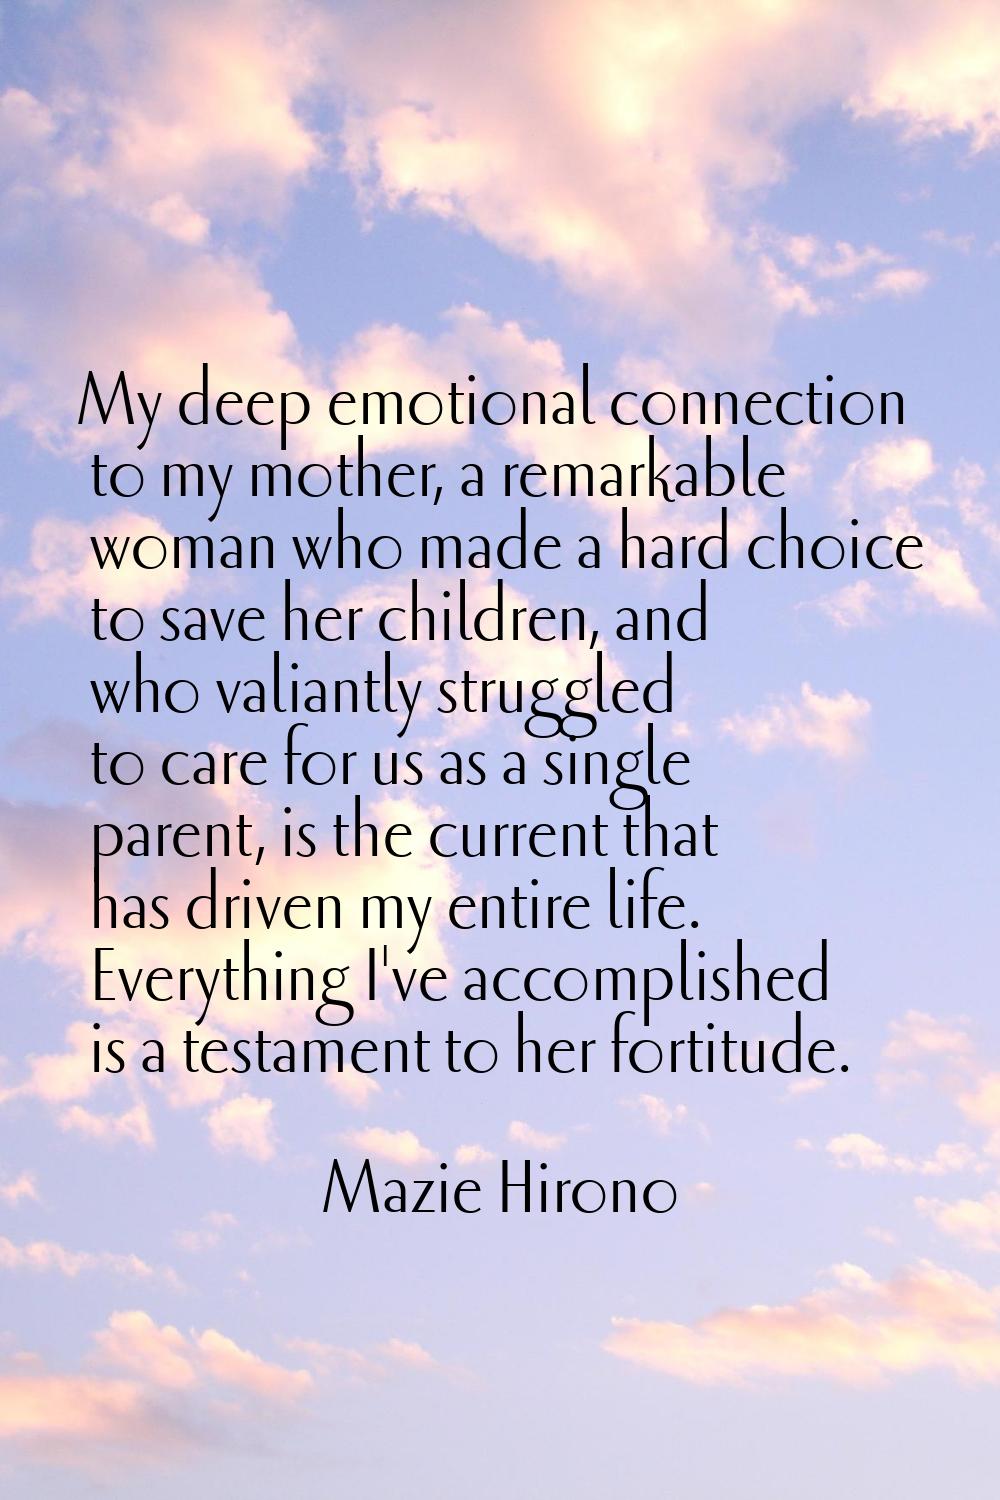 My deep emotional connection to my mother, a remarkable woman who made a hard choice to save her ch